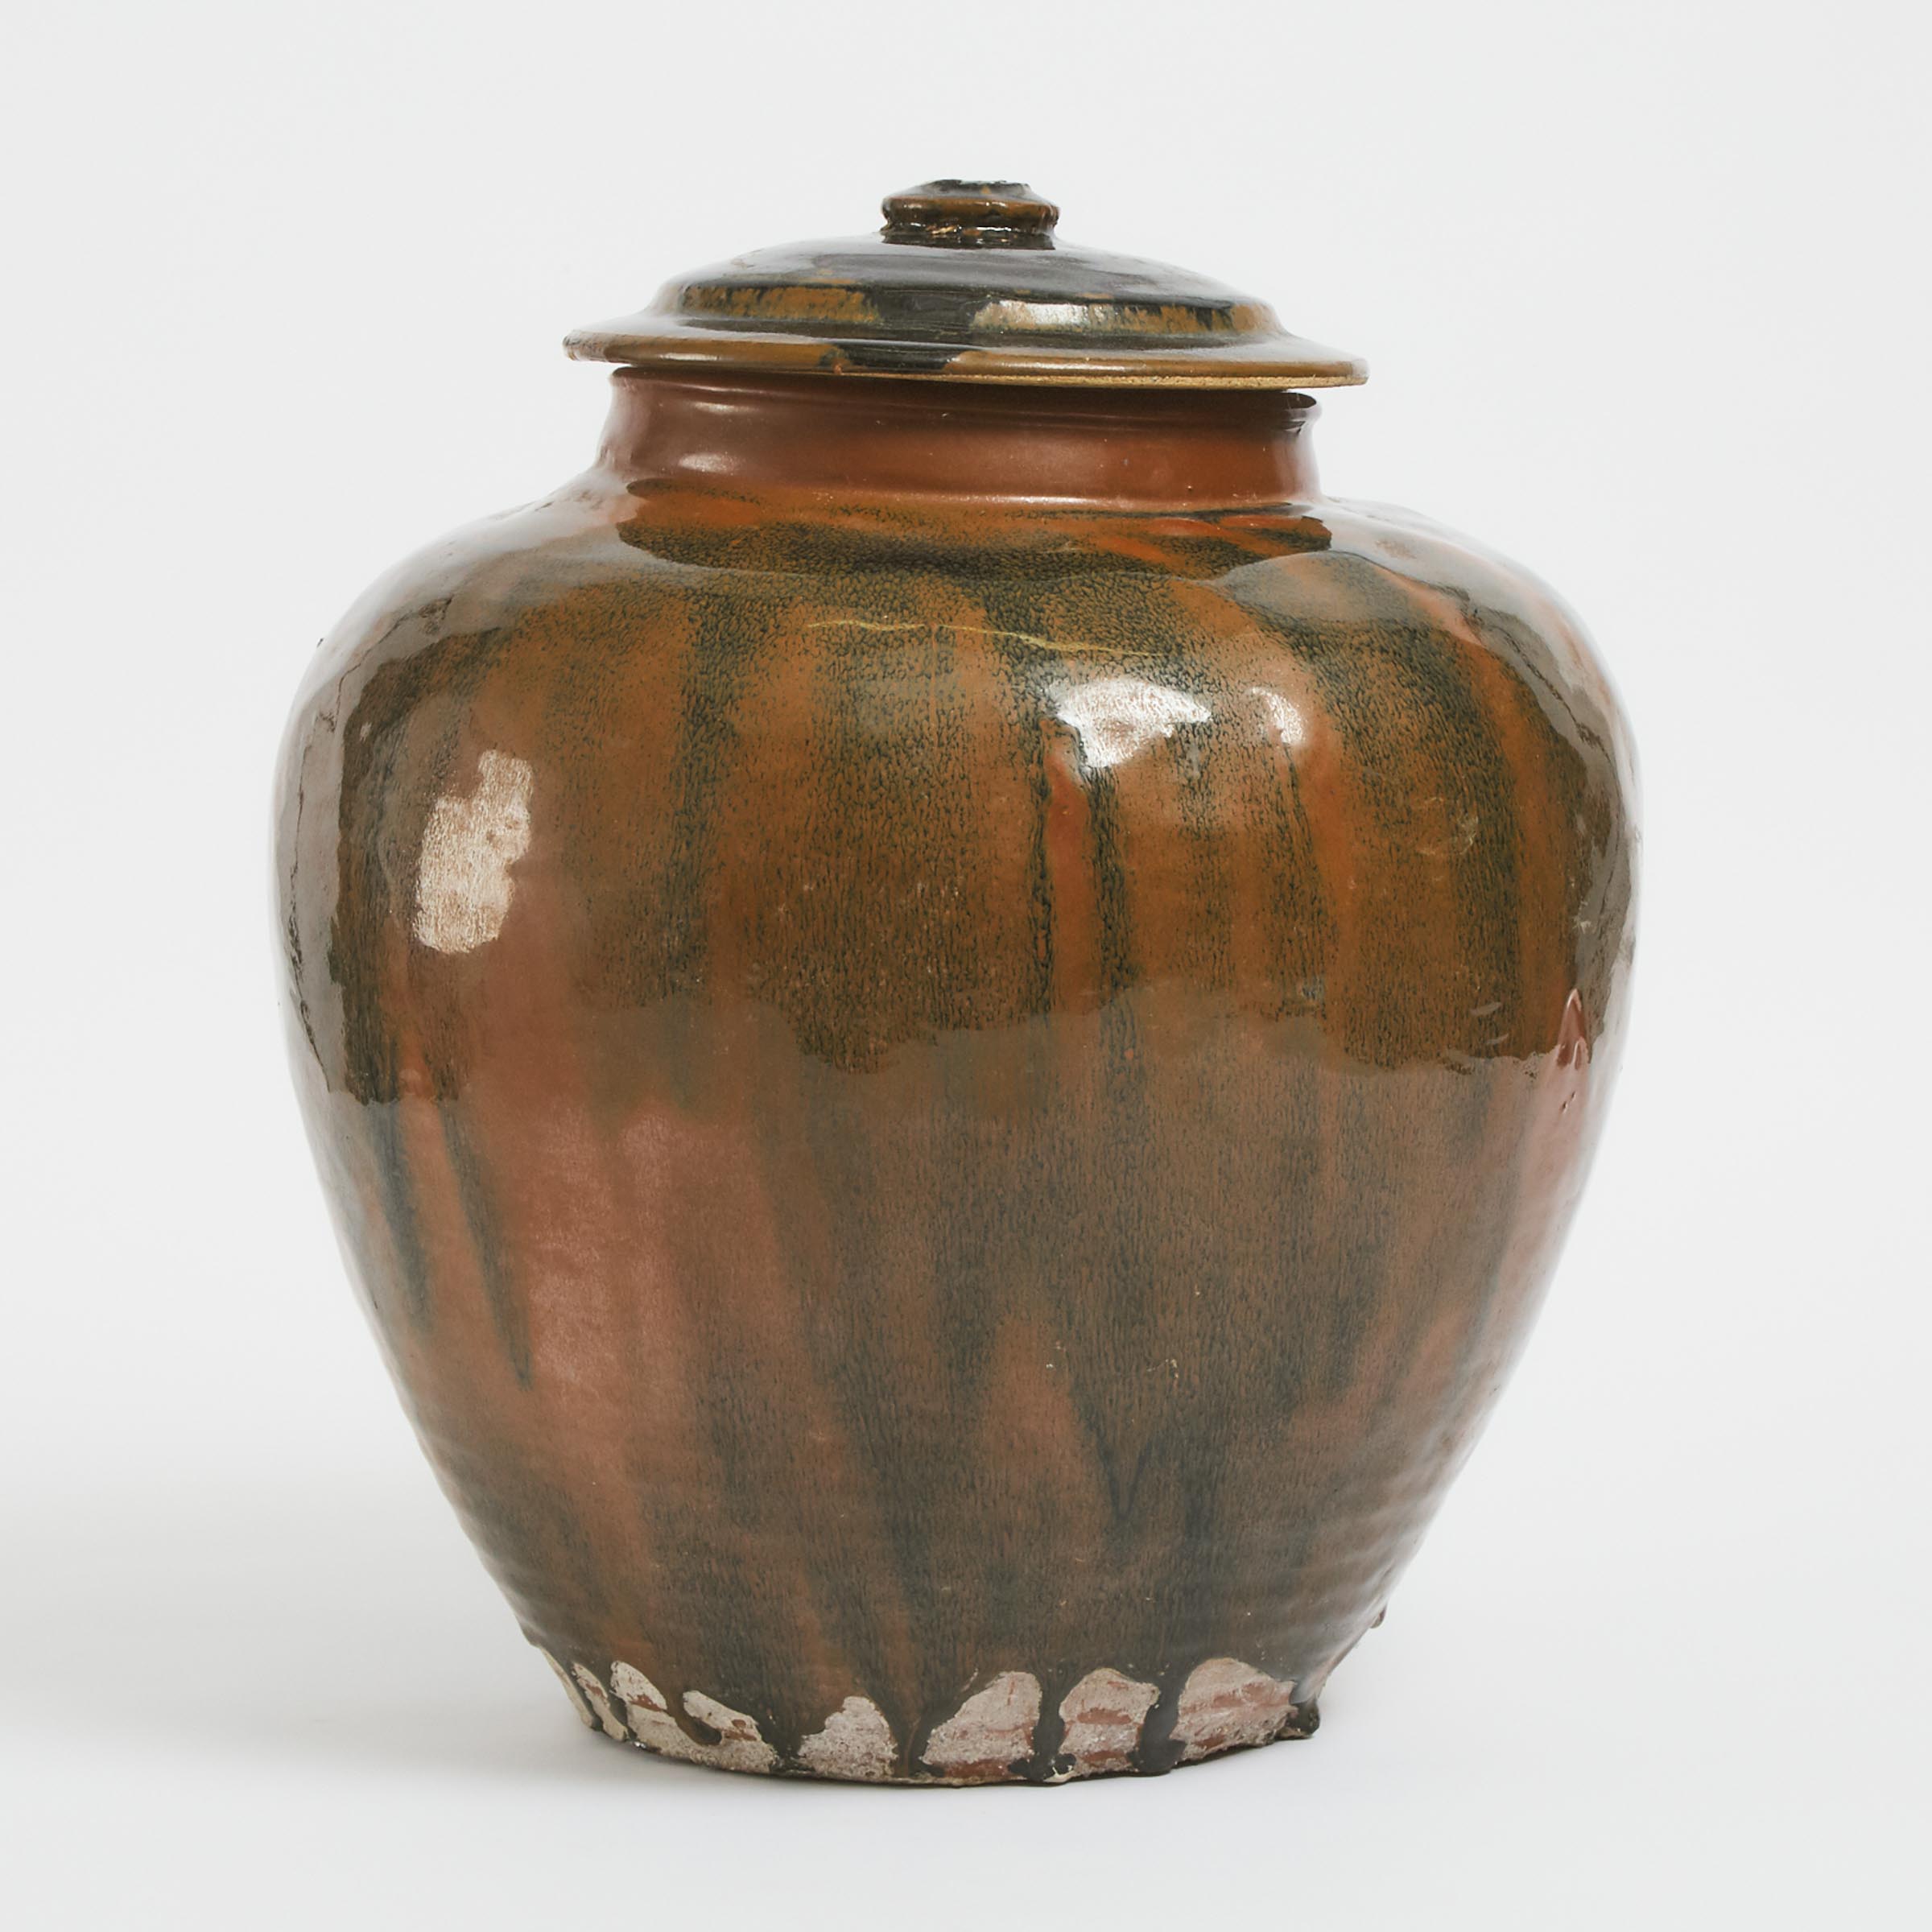 A Large Henan Black and Russet Glazed Jar and Cover, Yuan/Ming Dynasty